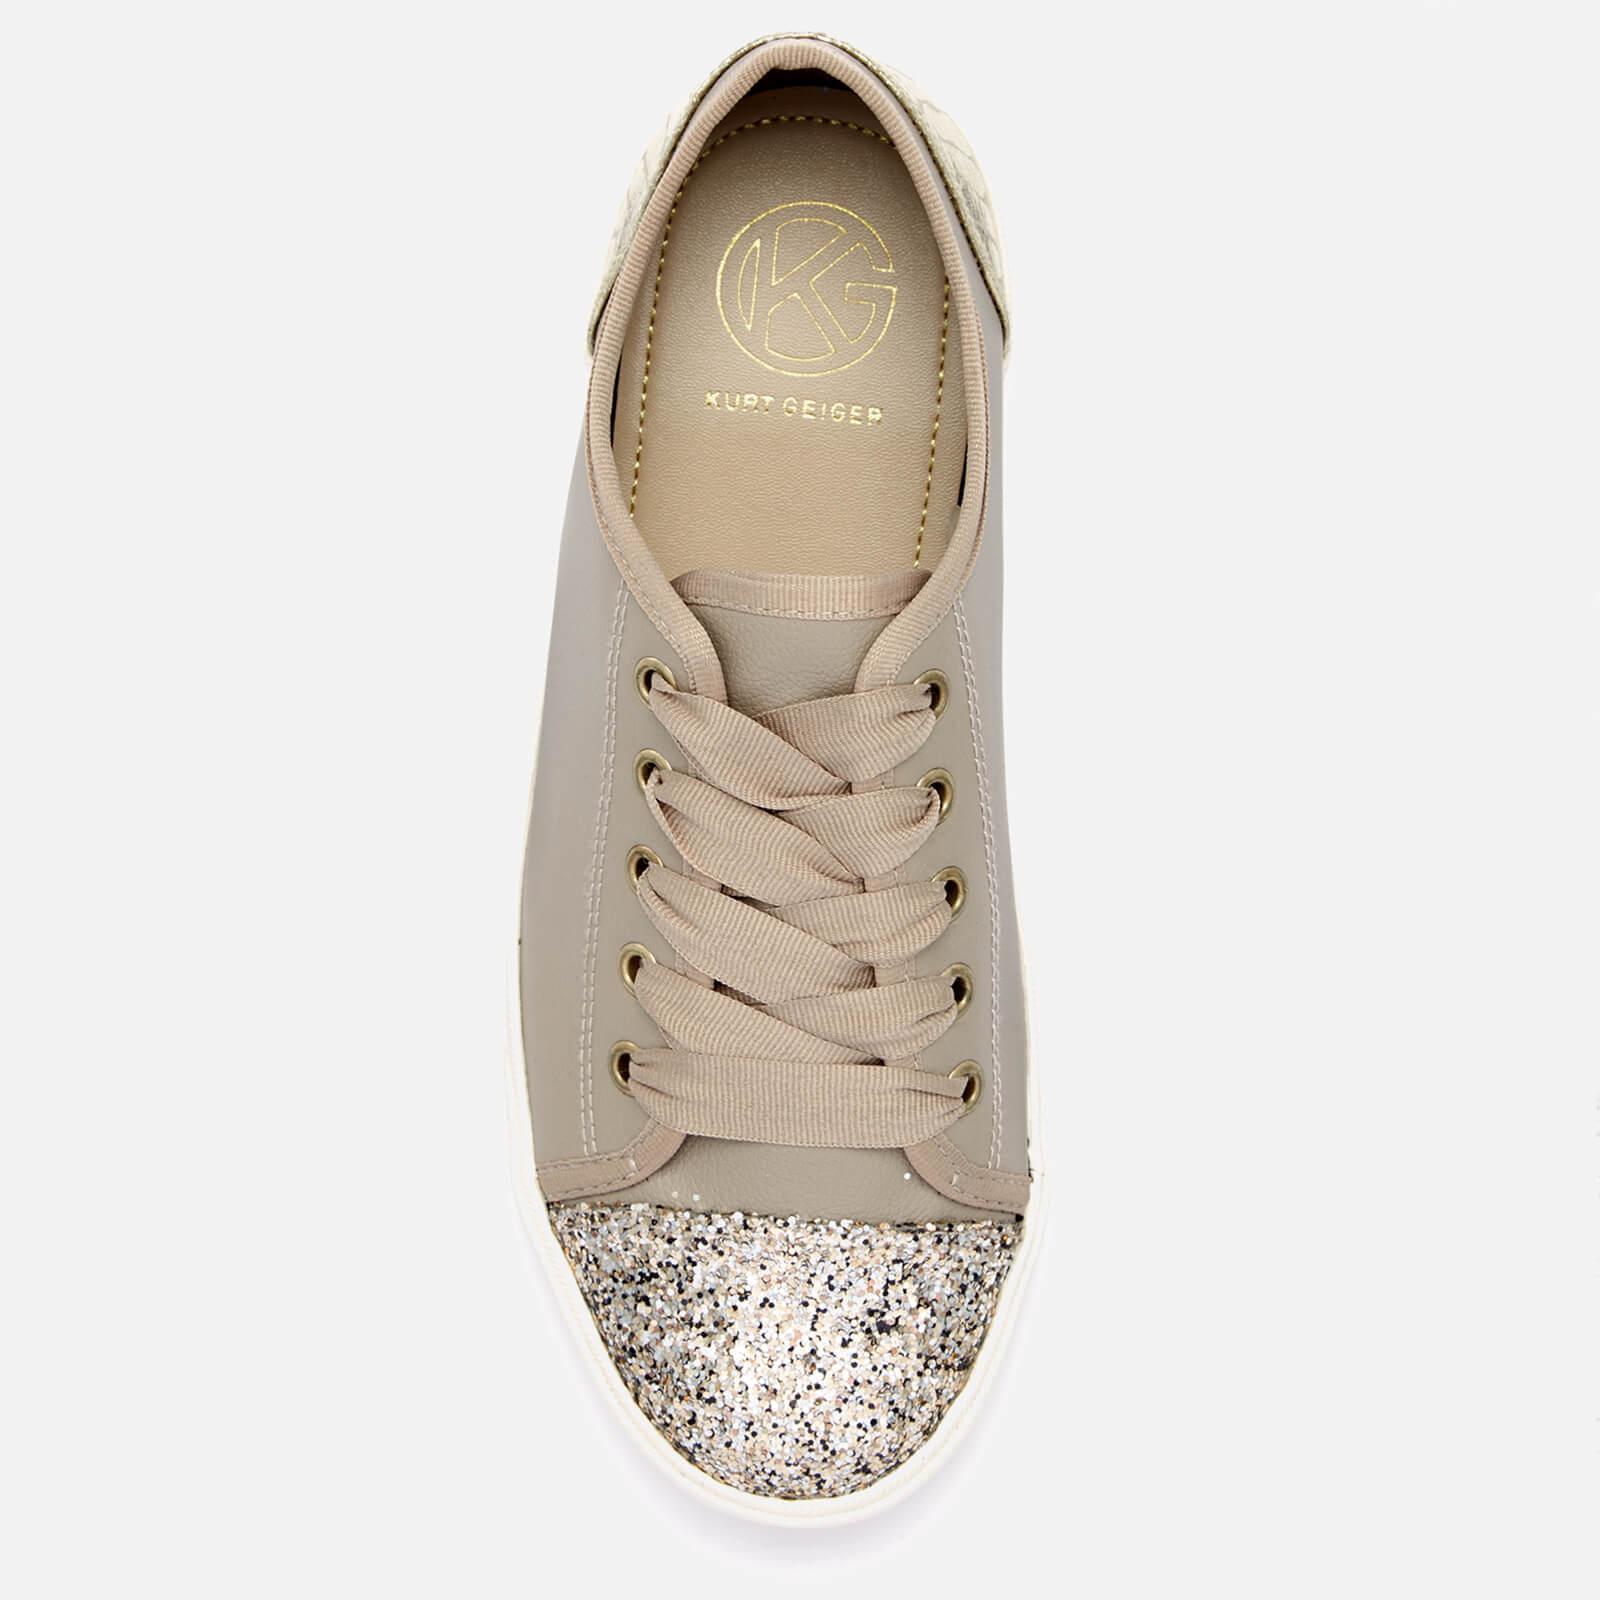 KG by Kurt Geiger Synthetic Lucca Glitter Trainers in Nude 